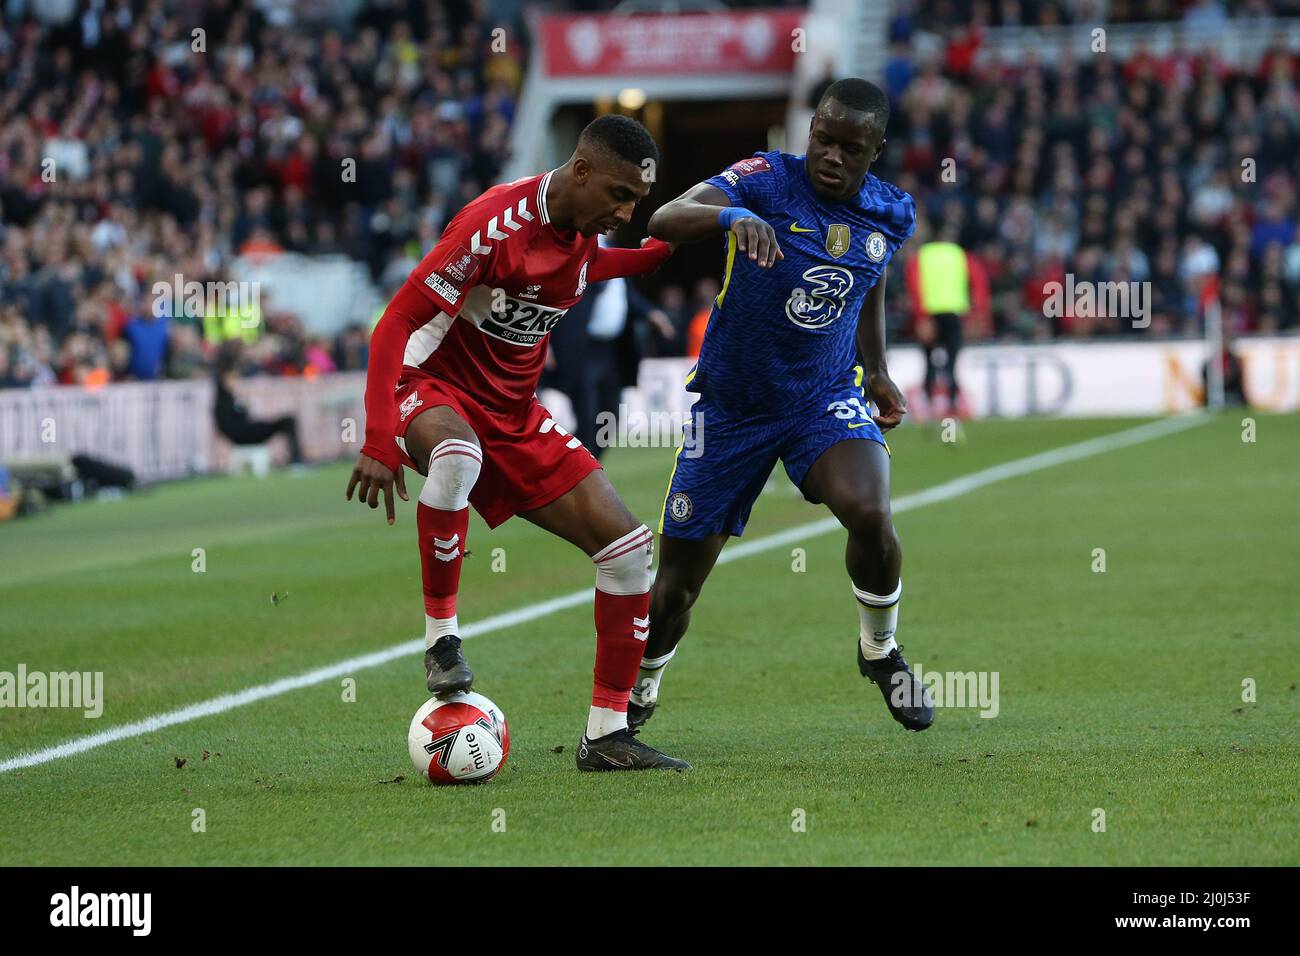 MIDDLESBROUGH, UK. MAR 19TH Middlesbrough's Isaiah Jones battles for possession with Chelsea's Malang Sarr during the FA Cup match between Middlesbrough and Chelsea at the Riverside Stadium, Middlesbrough on Saturday 19th March 2022. (Credit: Mark Fletcher | MI News) Credit: MI News & Sport /Alamy Live News Stock Photo